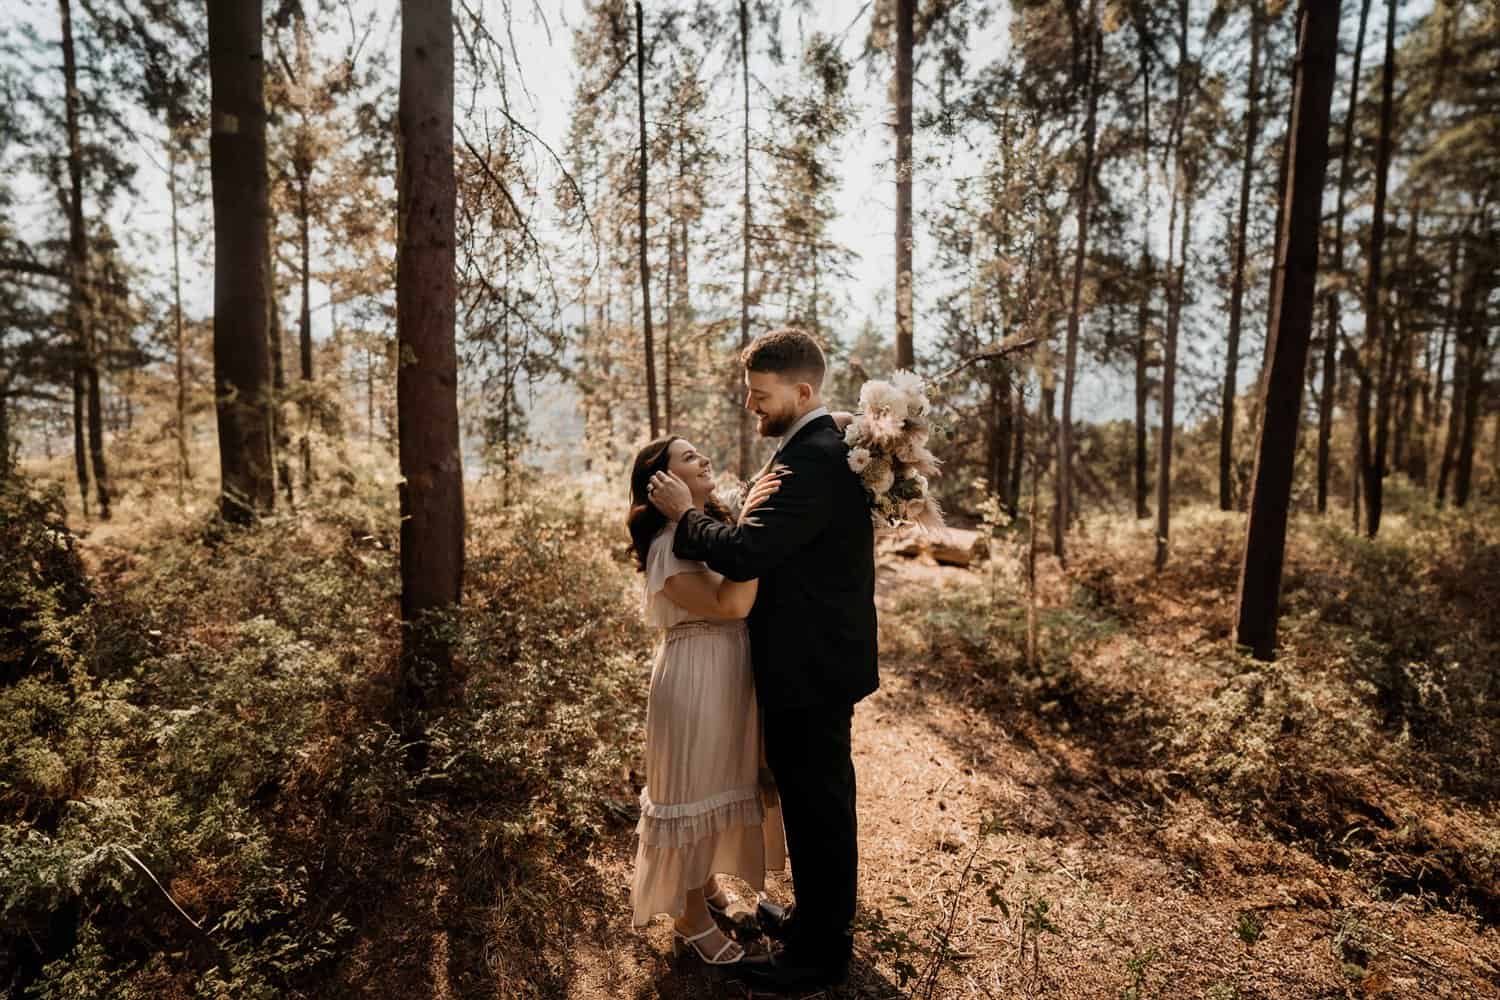 Forest Wedding Guide: How to Plan your Wedding in the Forest